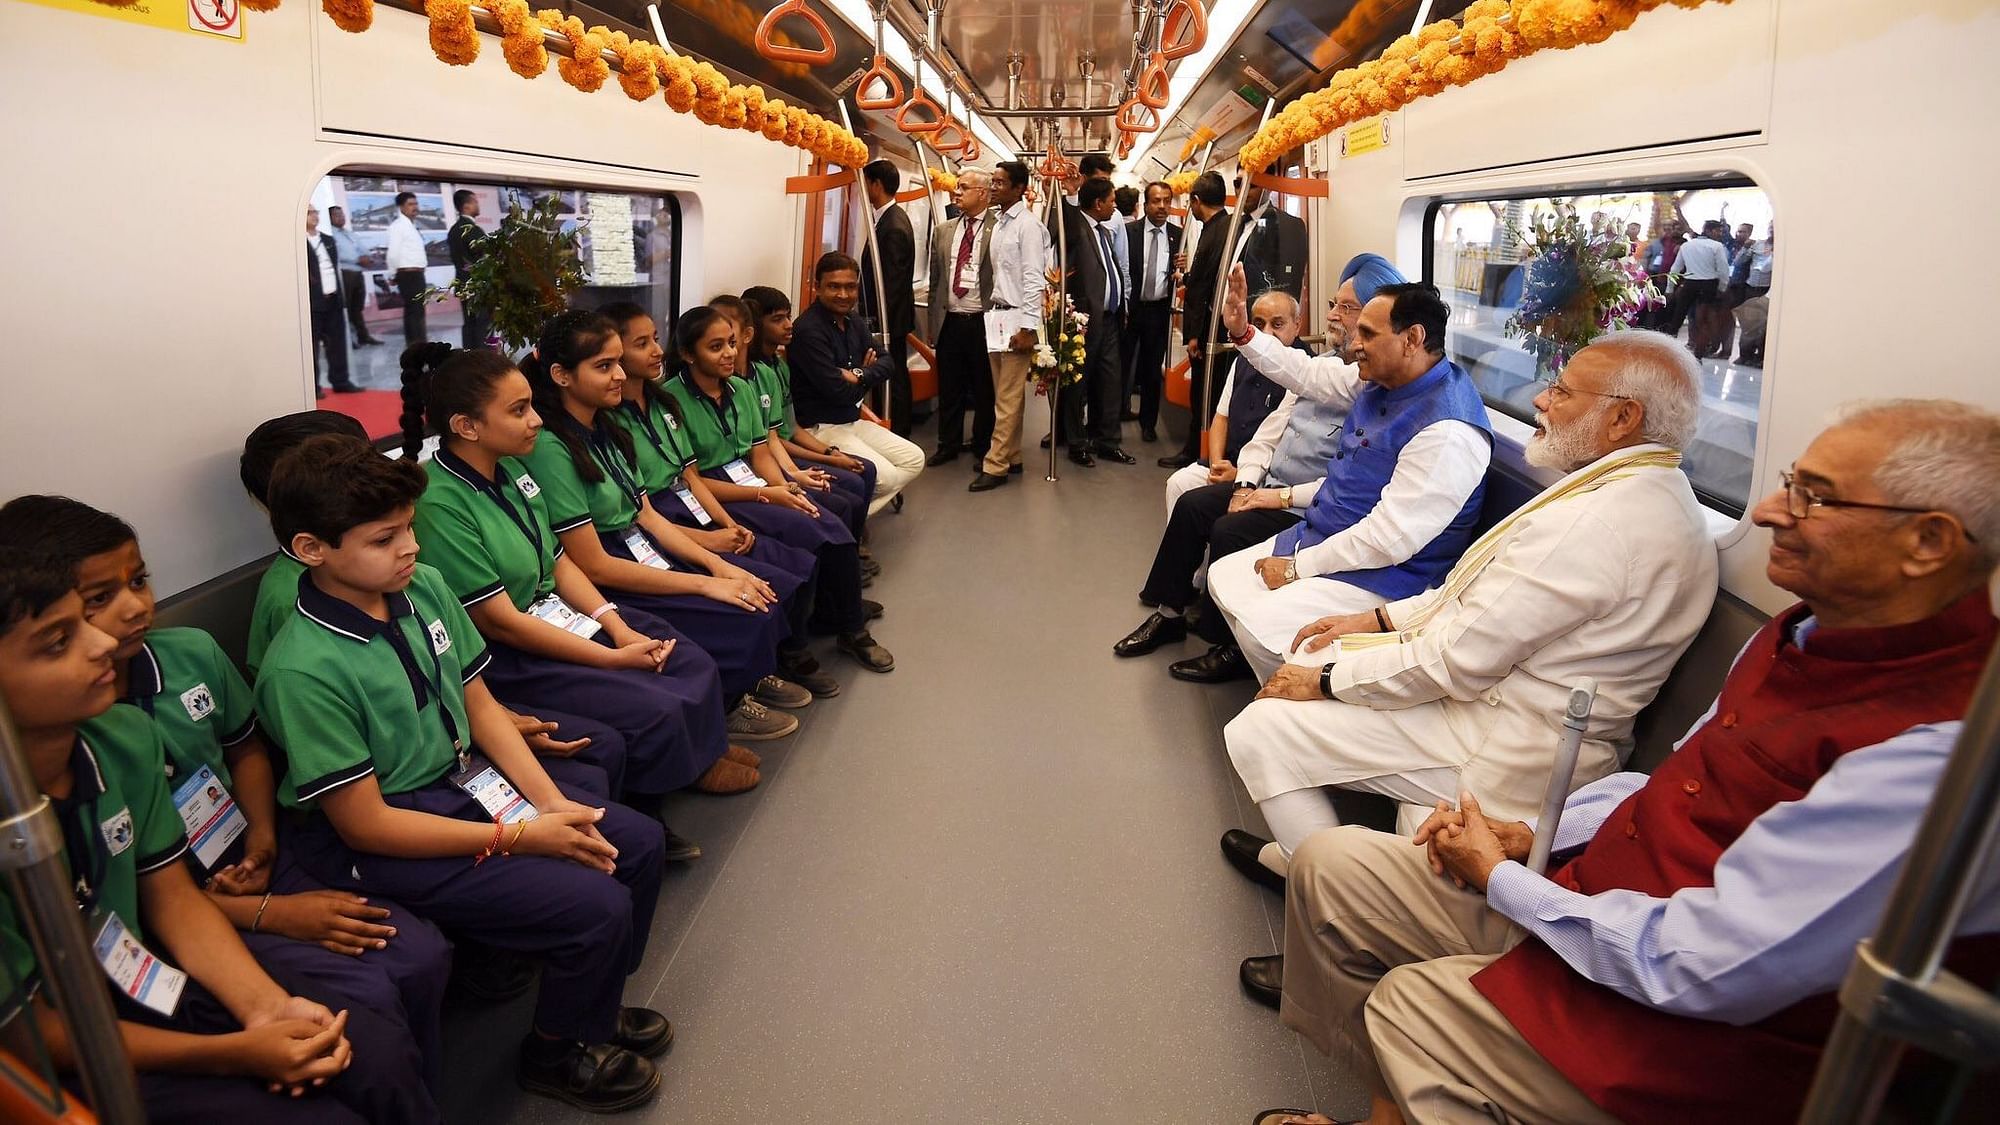 Prime Minister Narendra Modi travels in the newly inaugurated Ahmedabad Metro with Chief Minister Vijay Rupani and Gujarat Governor OP Kohli.